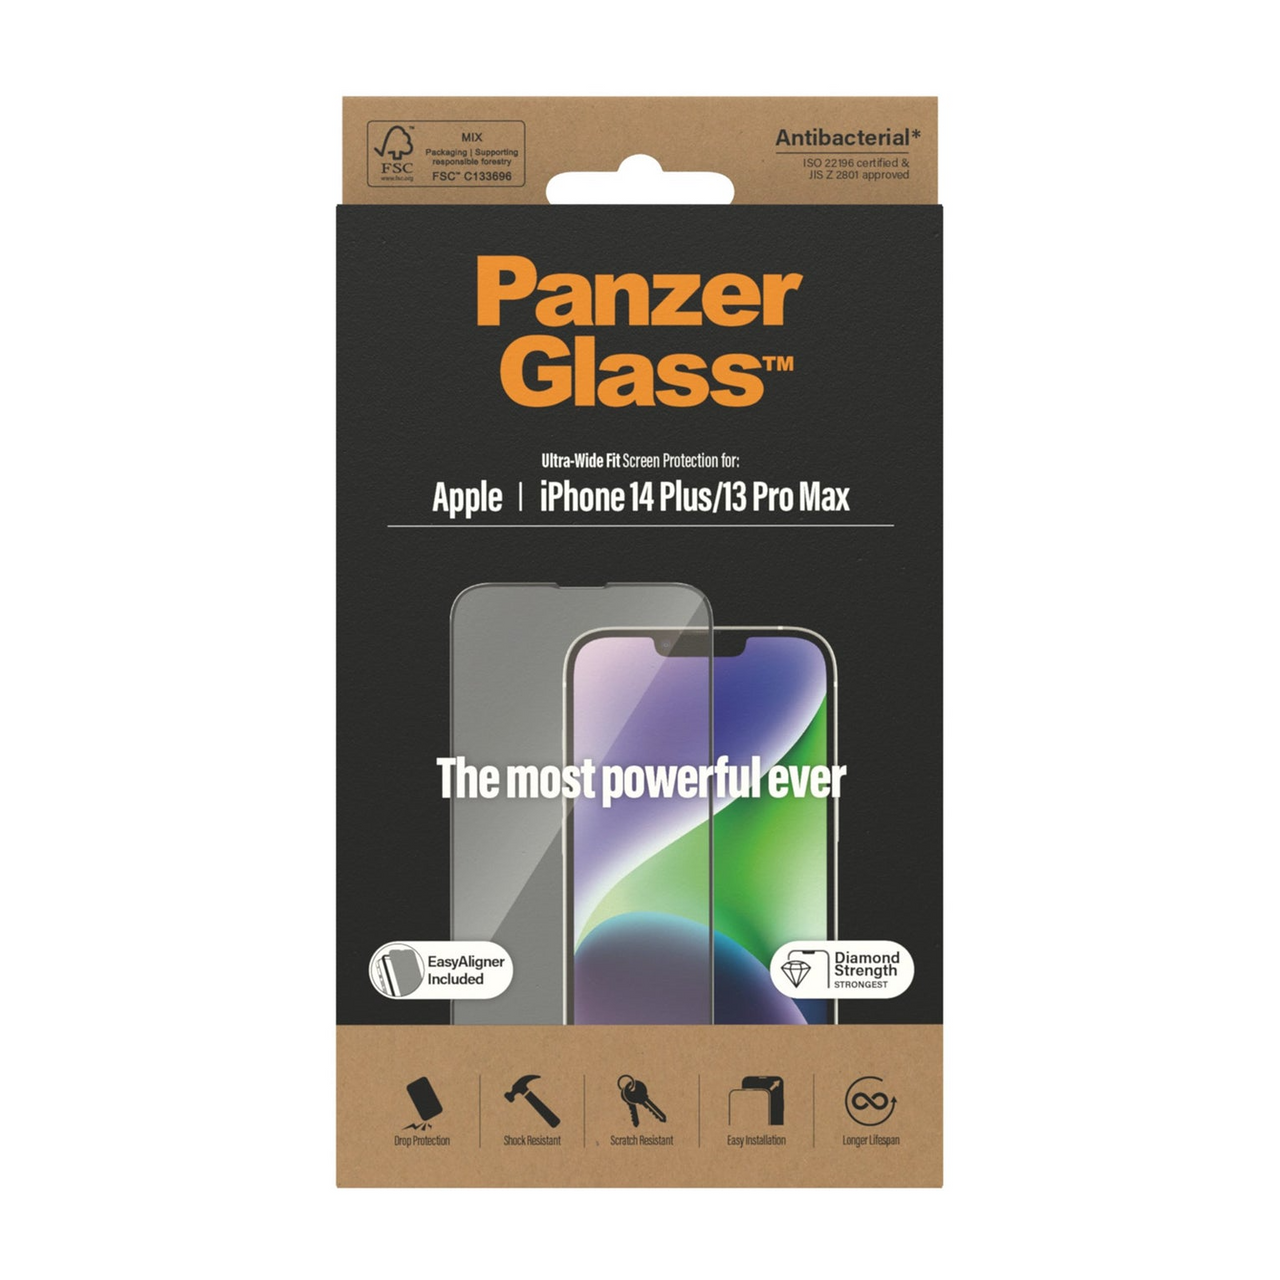 PanzerGlass Screen Protector Apple iPhone 13 Pro Max / 14 Plus - Ultra-Wide Fit